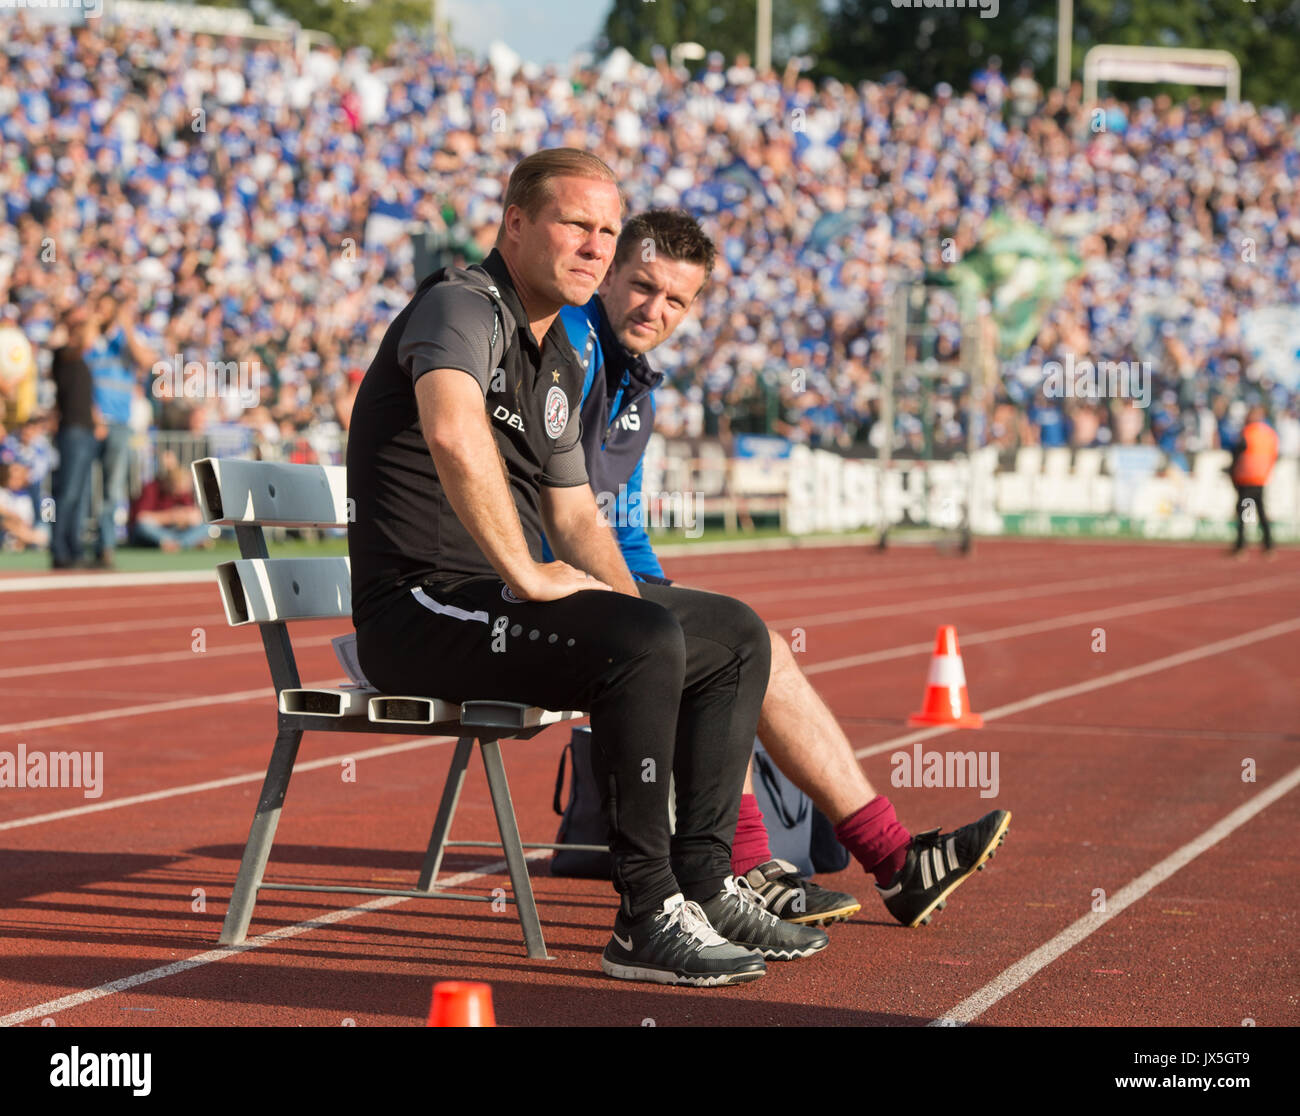 BFC Dynamo head coach Rene Rydlewicz and assistant coach Martino Gatti  (left to right) sitting on the bench during the DFB Cup match pitting BFC  Dynamo vs FC Schalke 04 in the